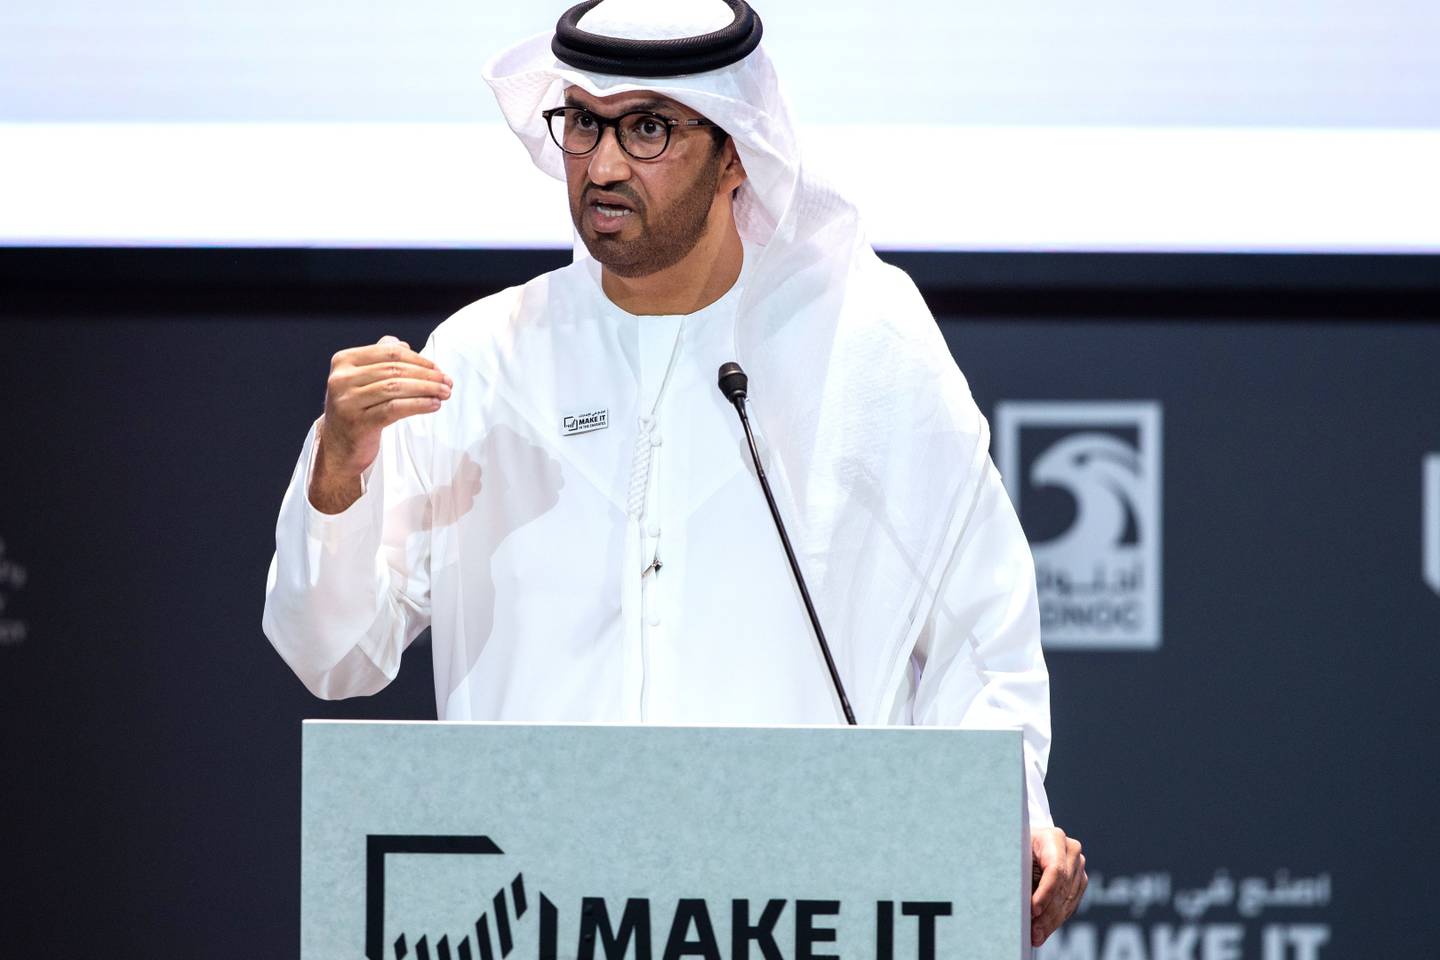 Dr Sultan Al Jaber: UAE economy came out stronger after the pandemic